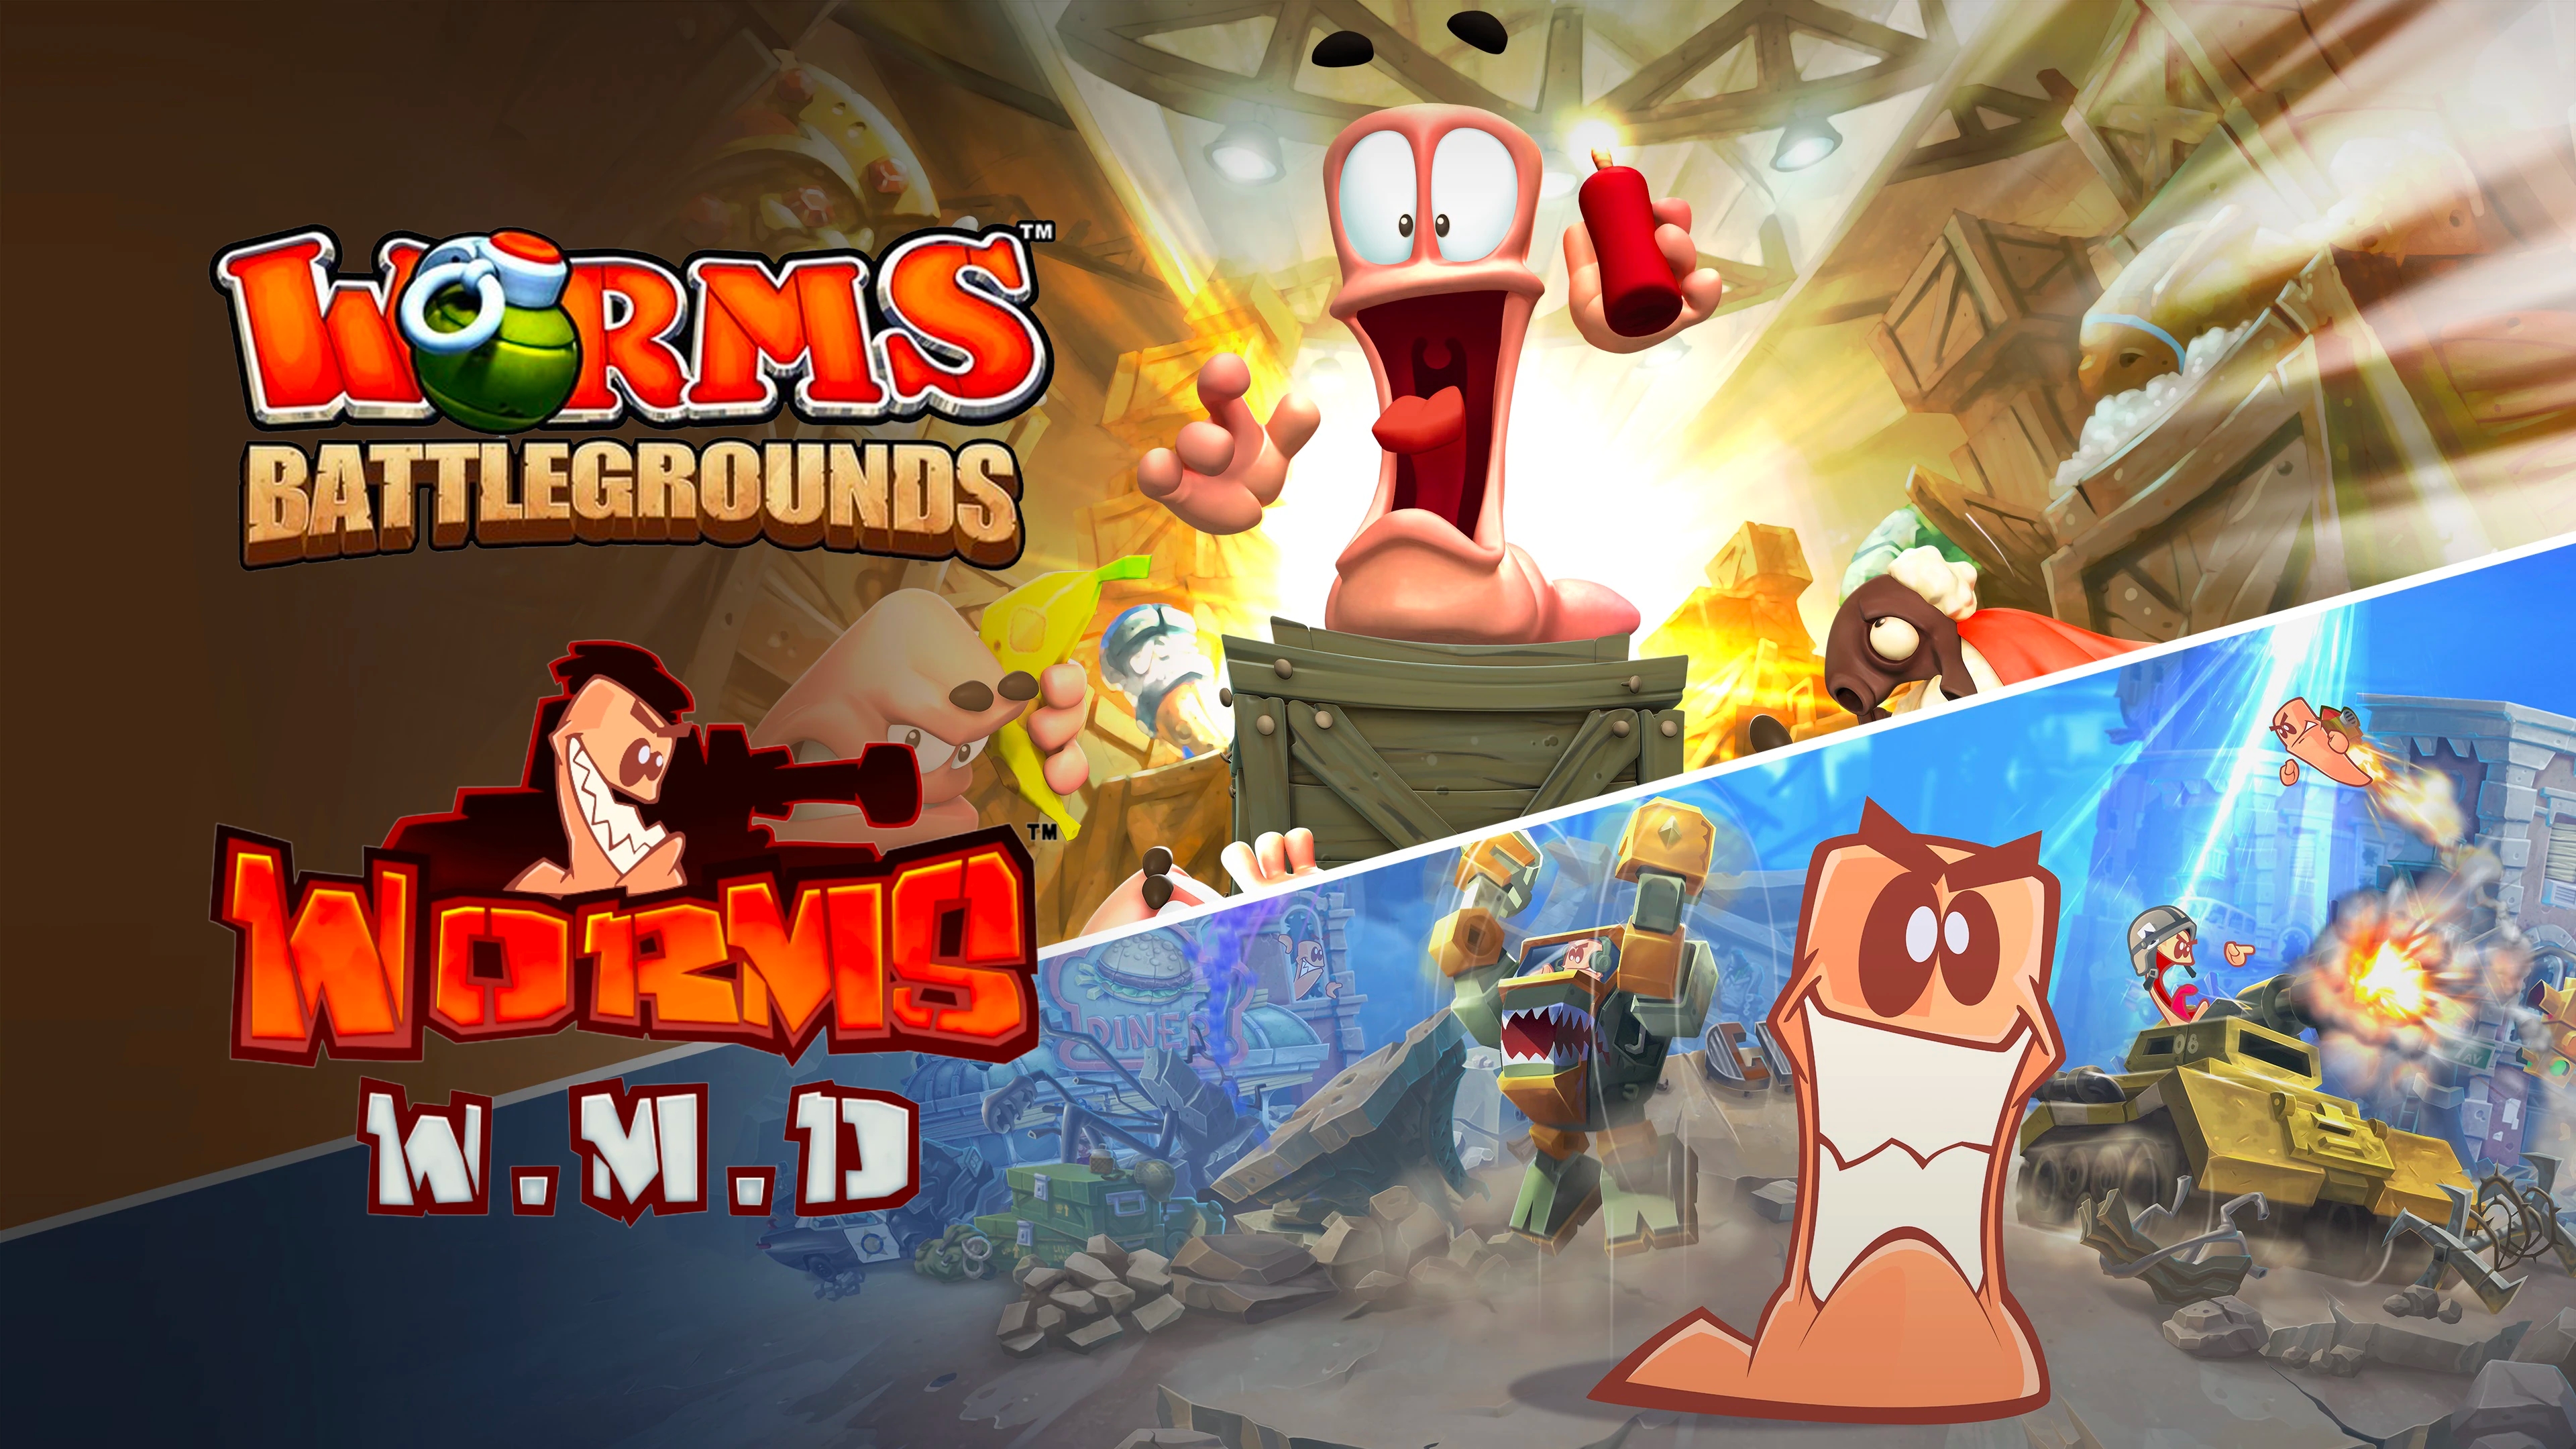 Worms Battlegrounds Microsoft Xbox One Game 16 Years for sale online 